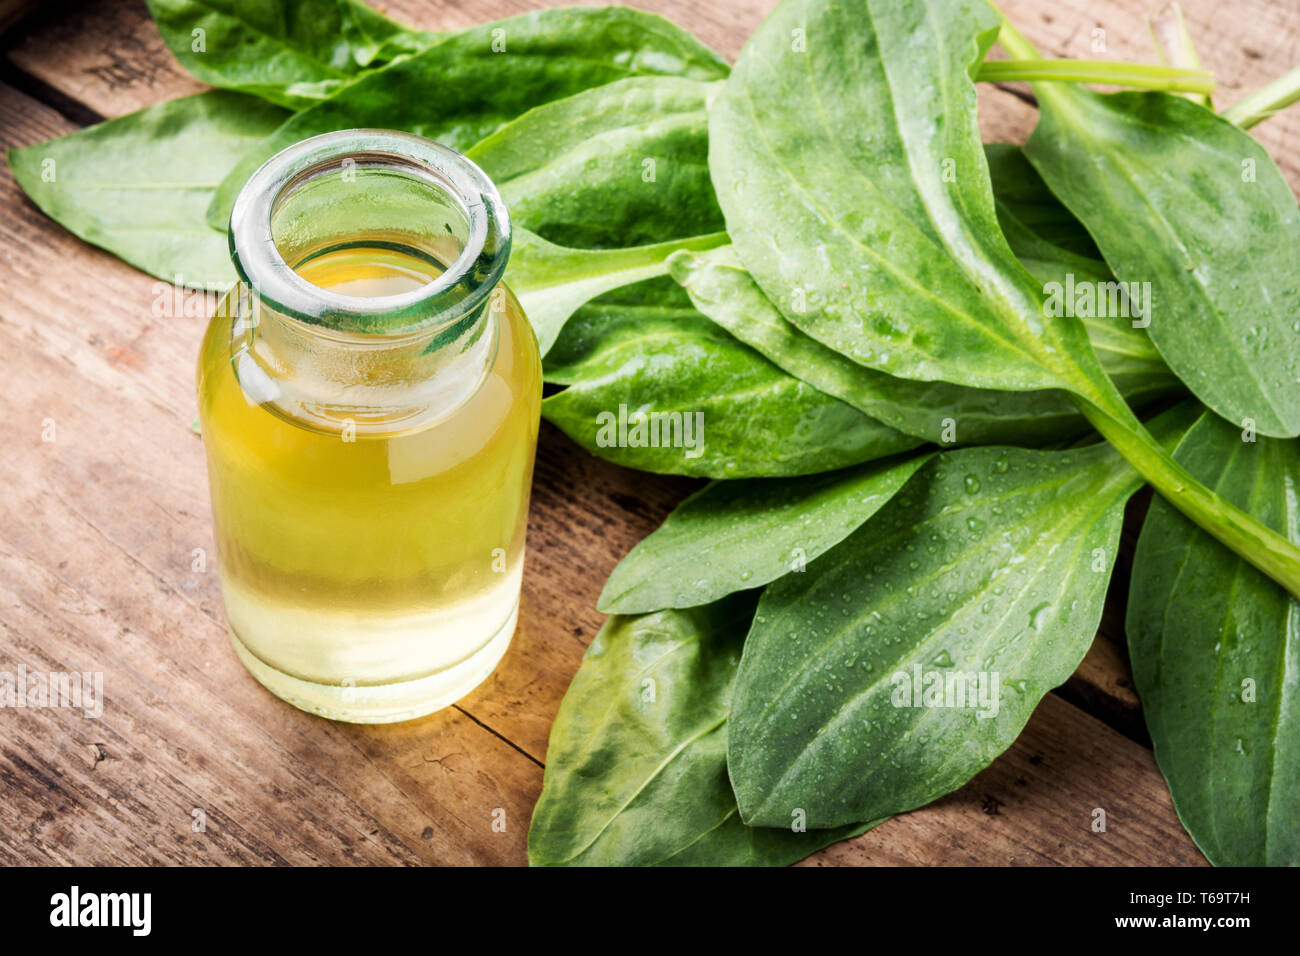 Leaf of greater plantain.Healing herbs.Leaves of a plantain Stock Photo